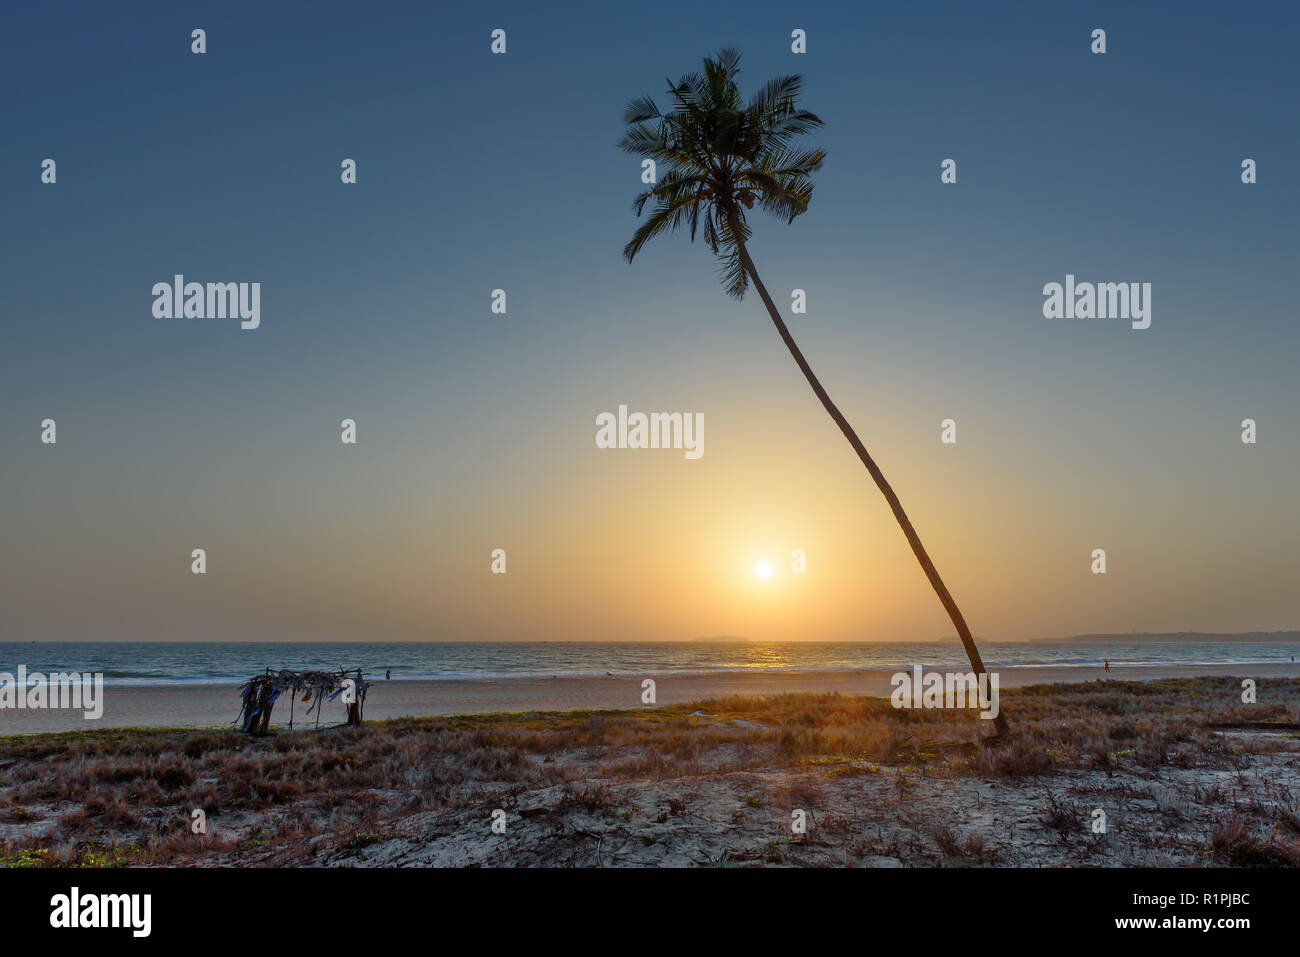 Palm trees at sunset on exotic beach Stock Photo